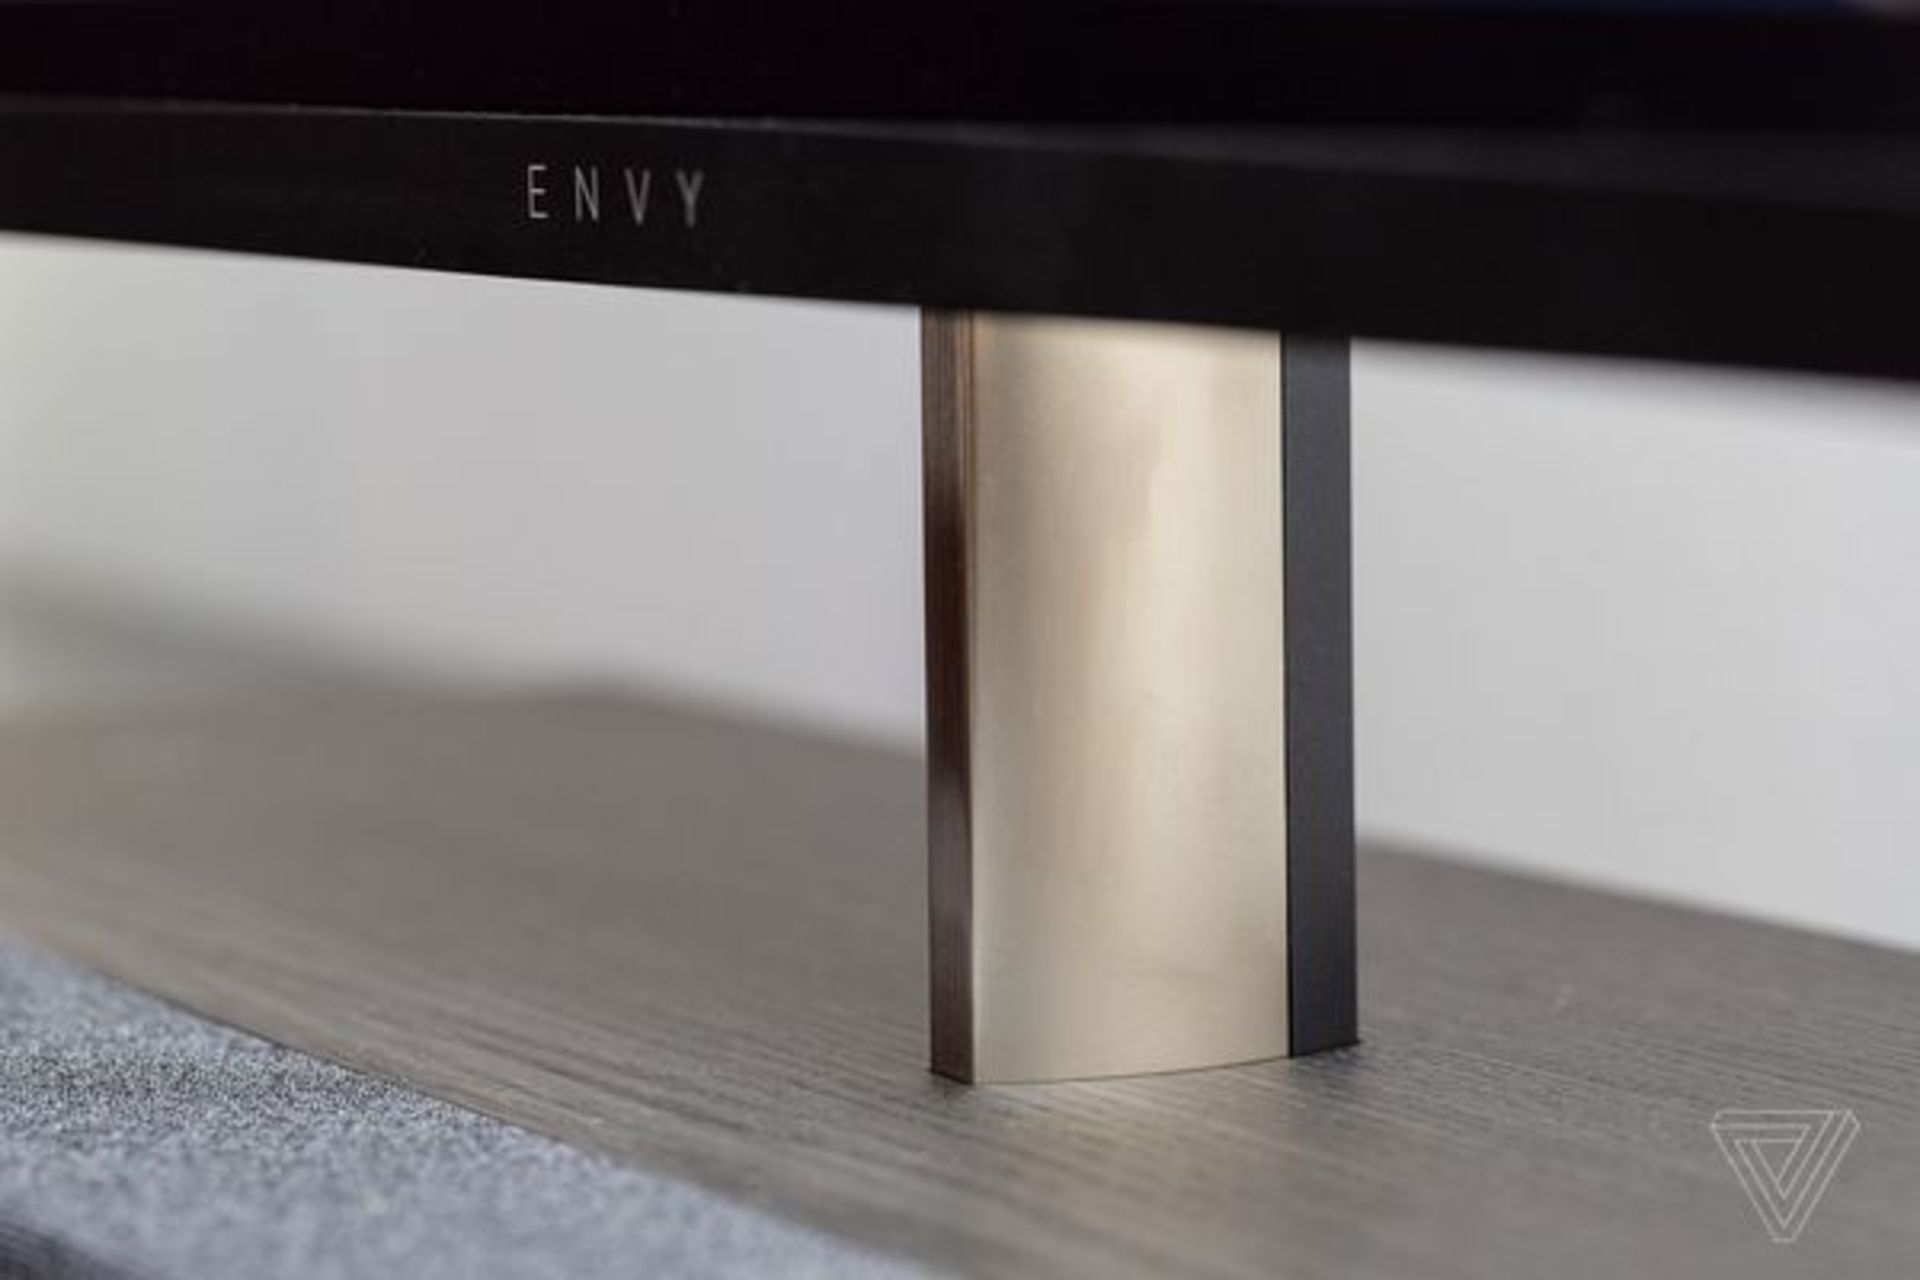 Envy Curved AiO